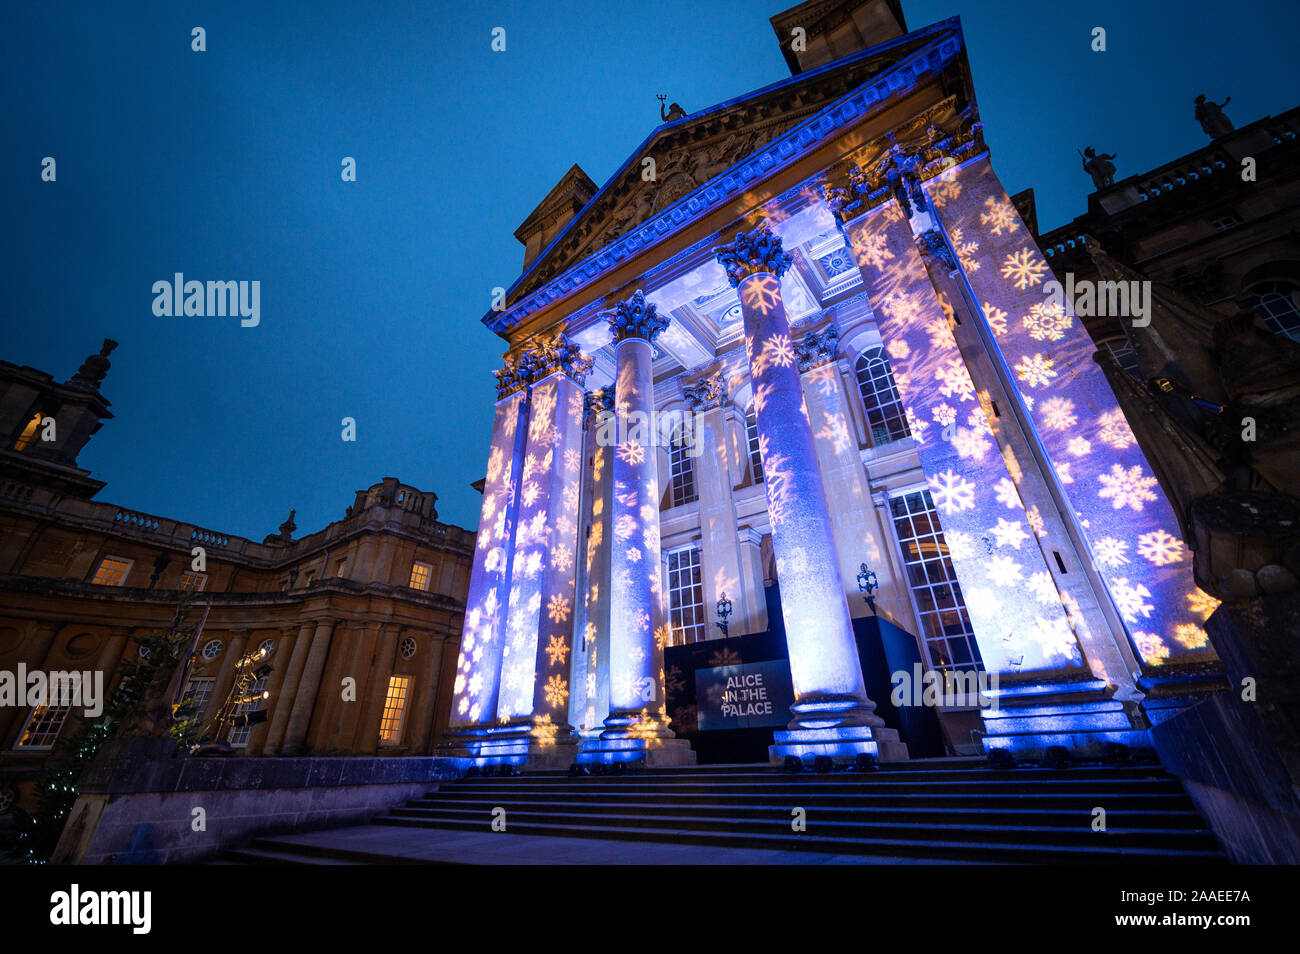 Blenheim Palace, Oxfordshire, UK. 21st November 2019. Alice in Wonderland exhibition 'Alice in the Palace' at Blenheim Palace as part of their Christmas celebrations. Andrew Walmsley/Alamy Live News Stock Photo